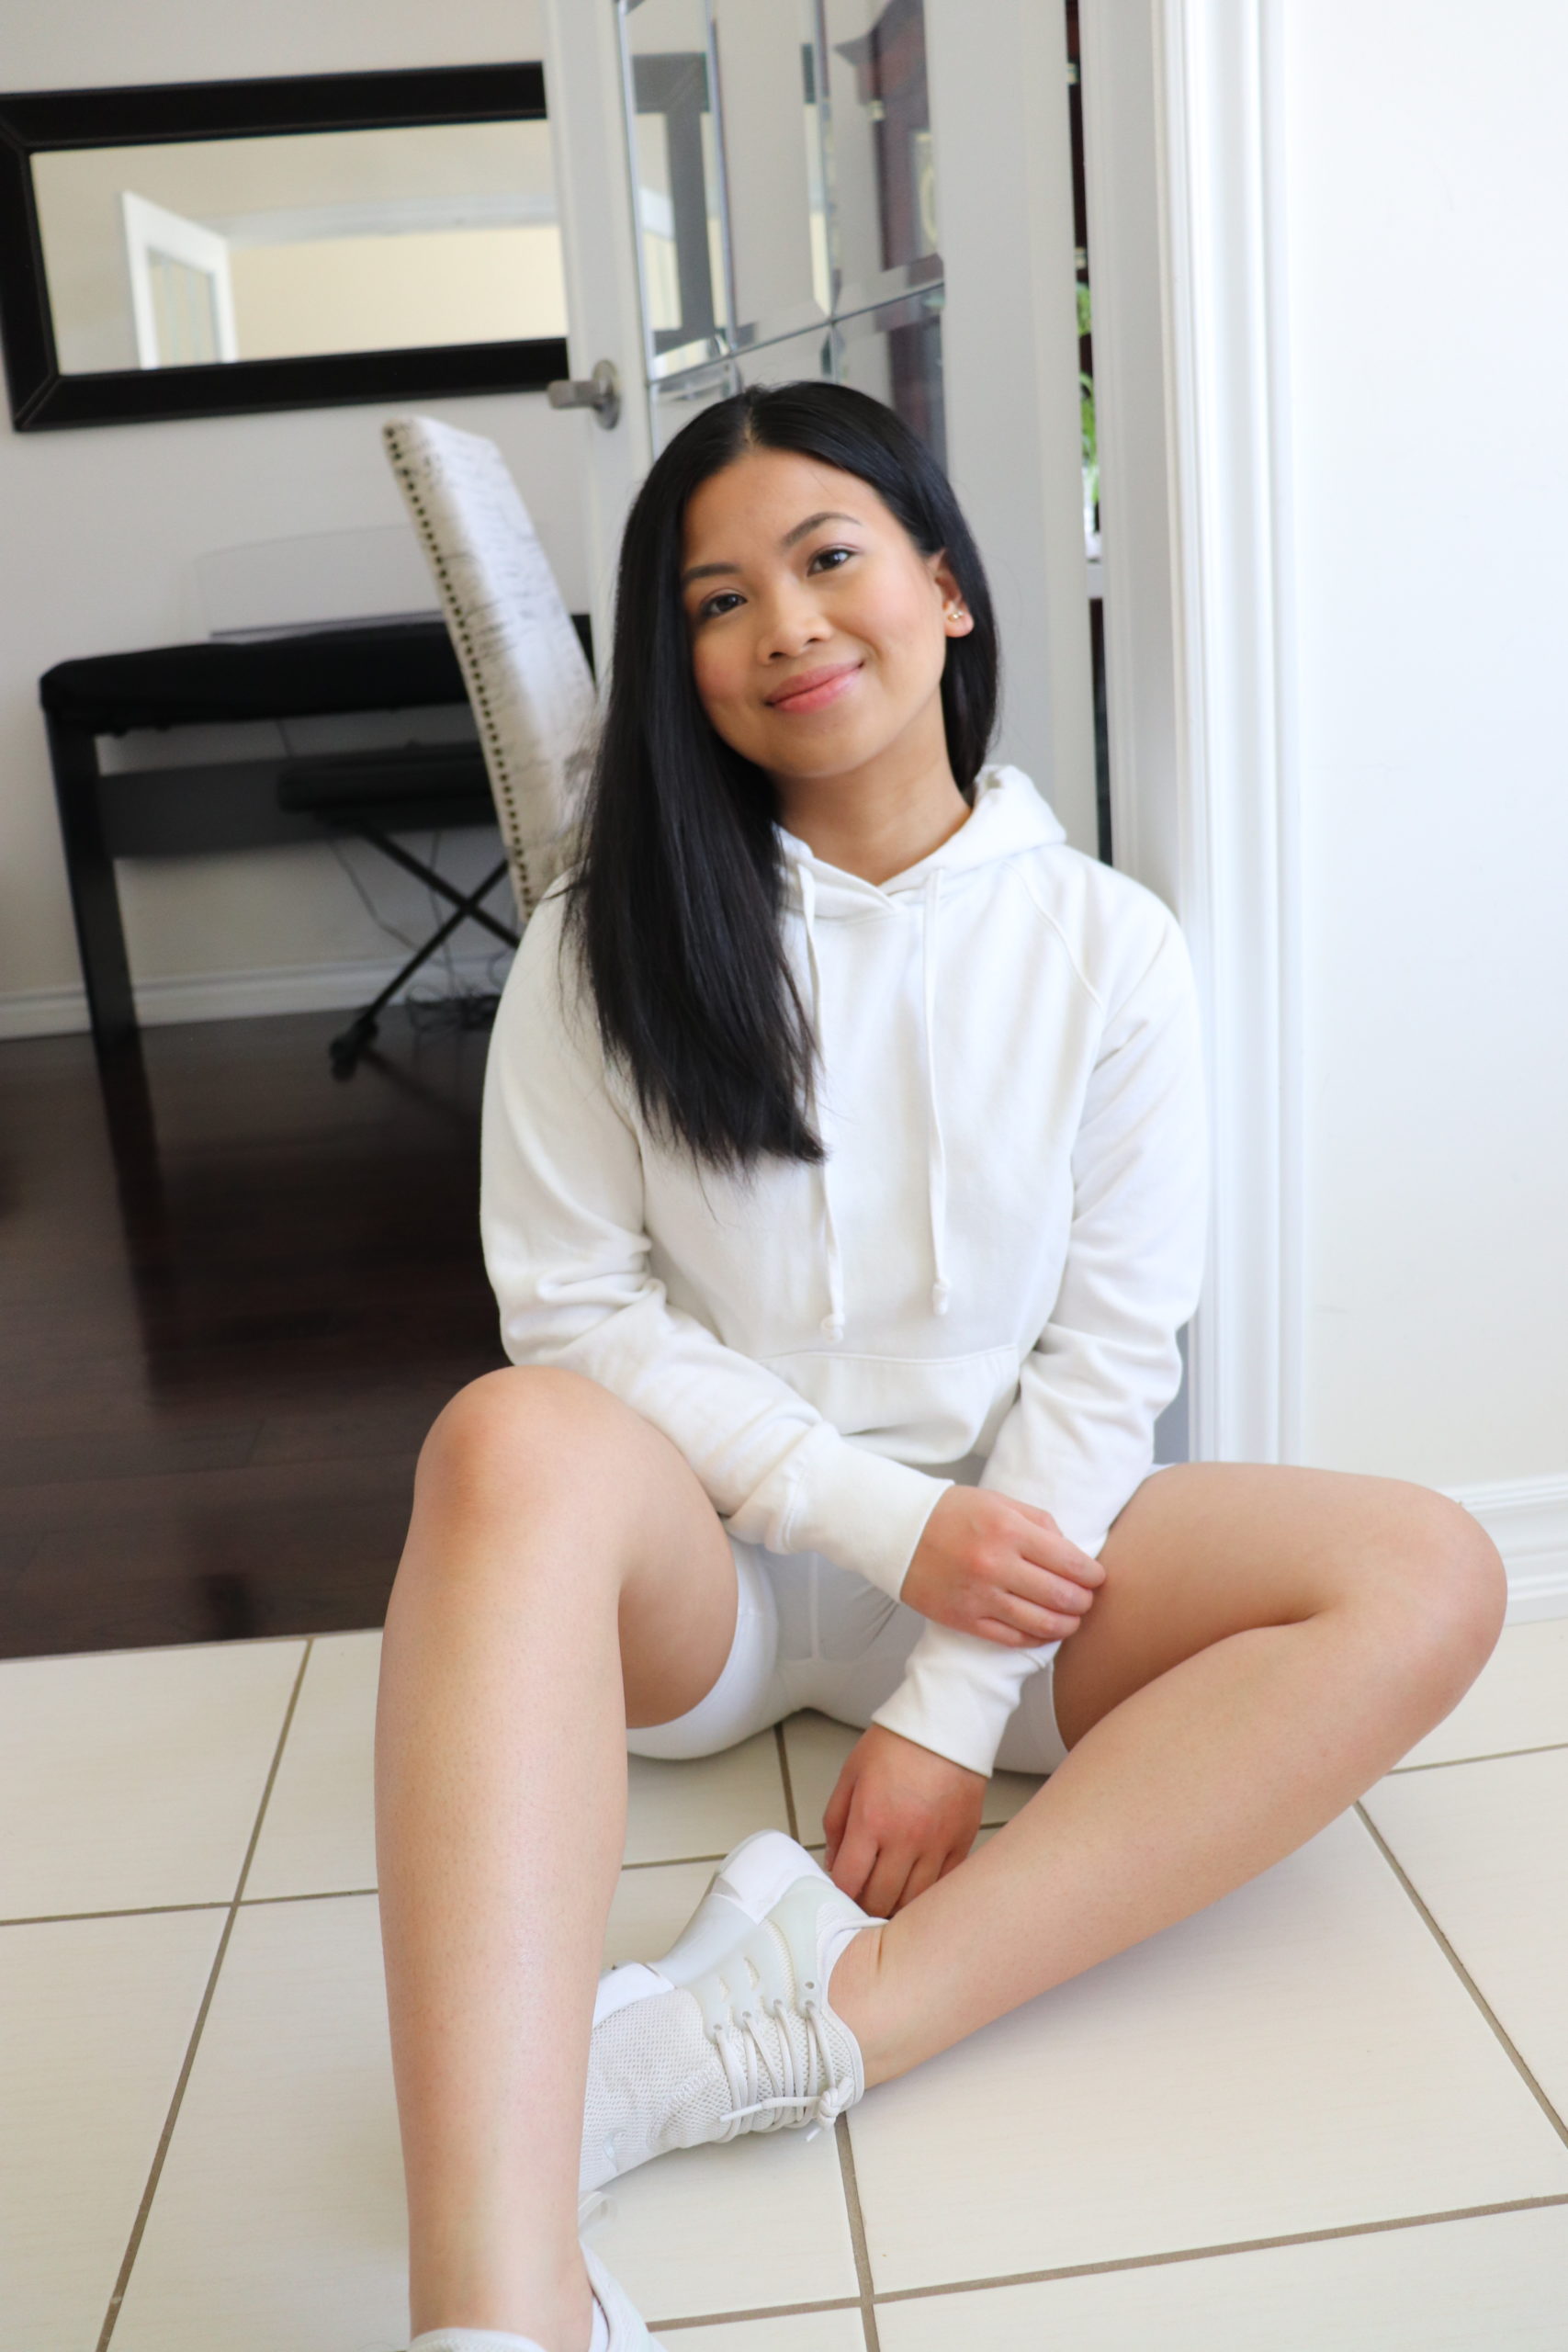 Recent graduate Nathalee Pauline poses on the floor in her Toronto, Ontario apartment